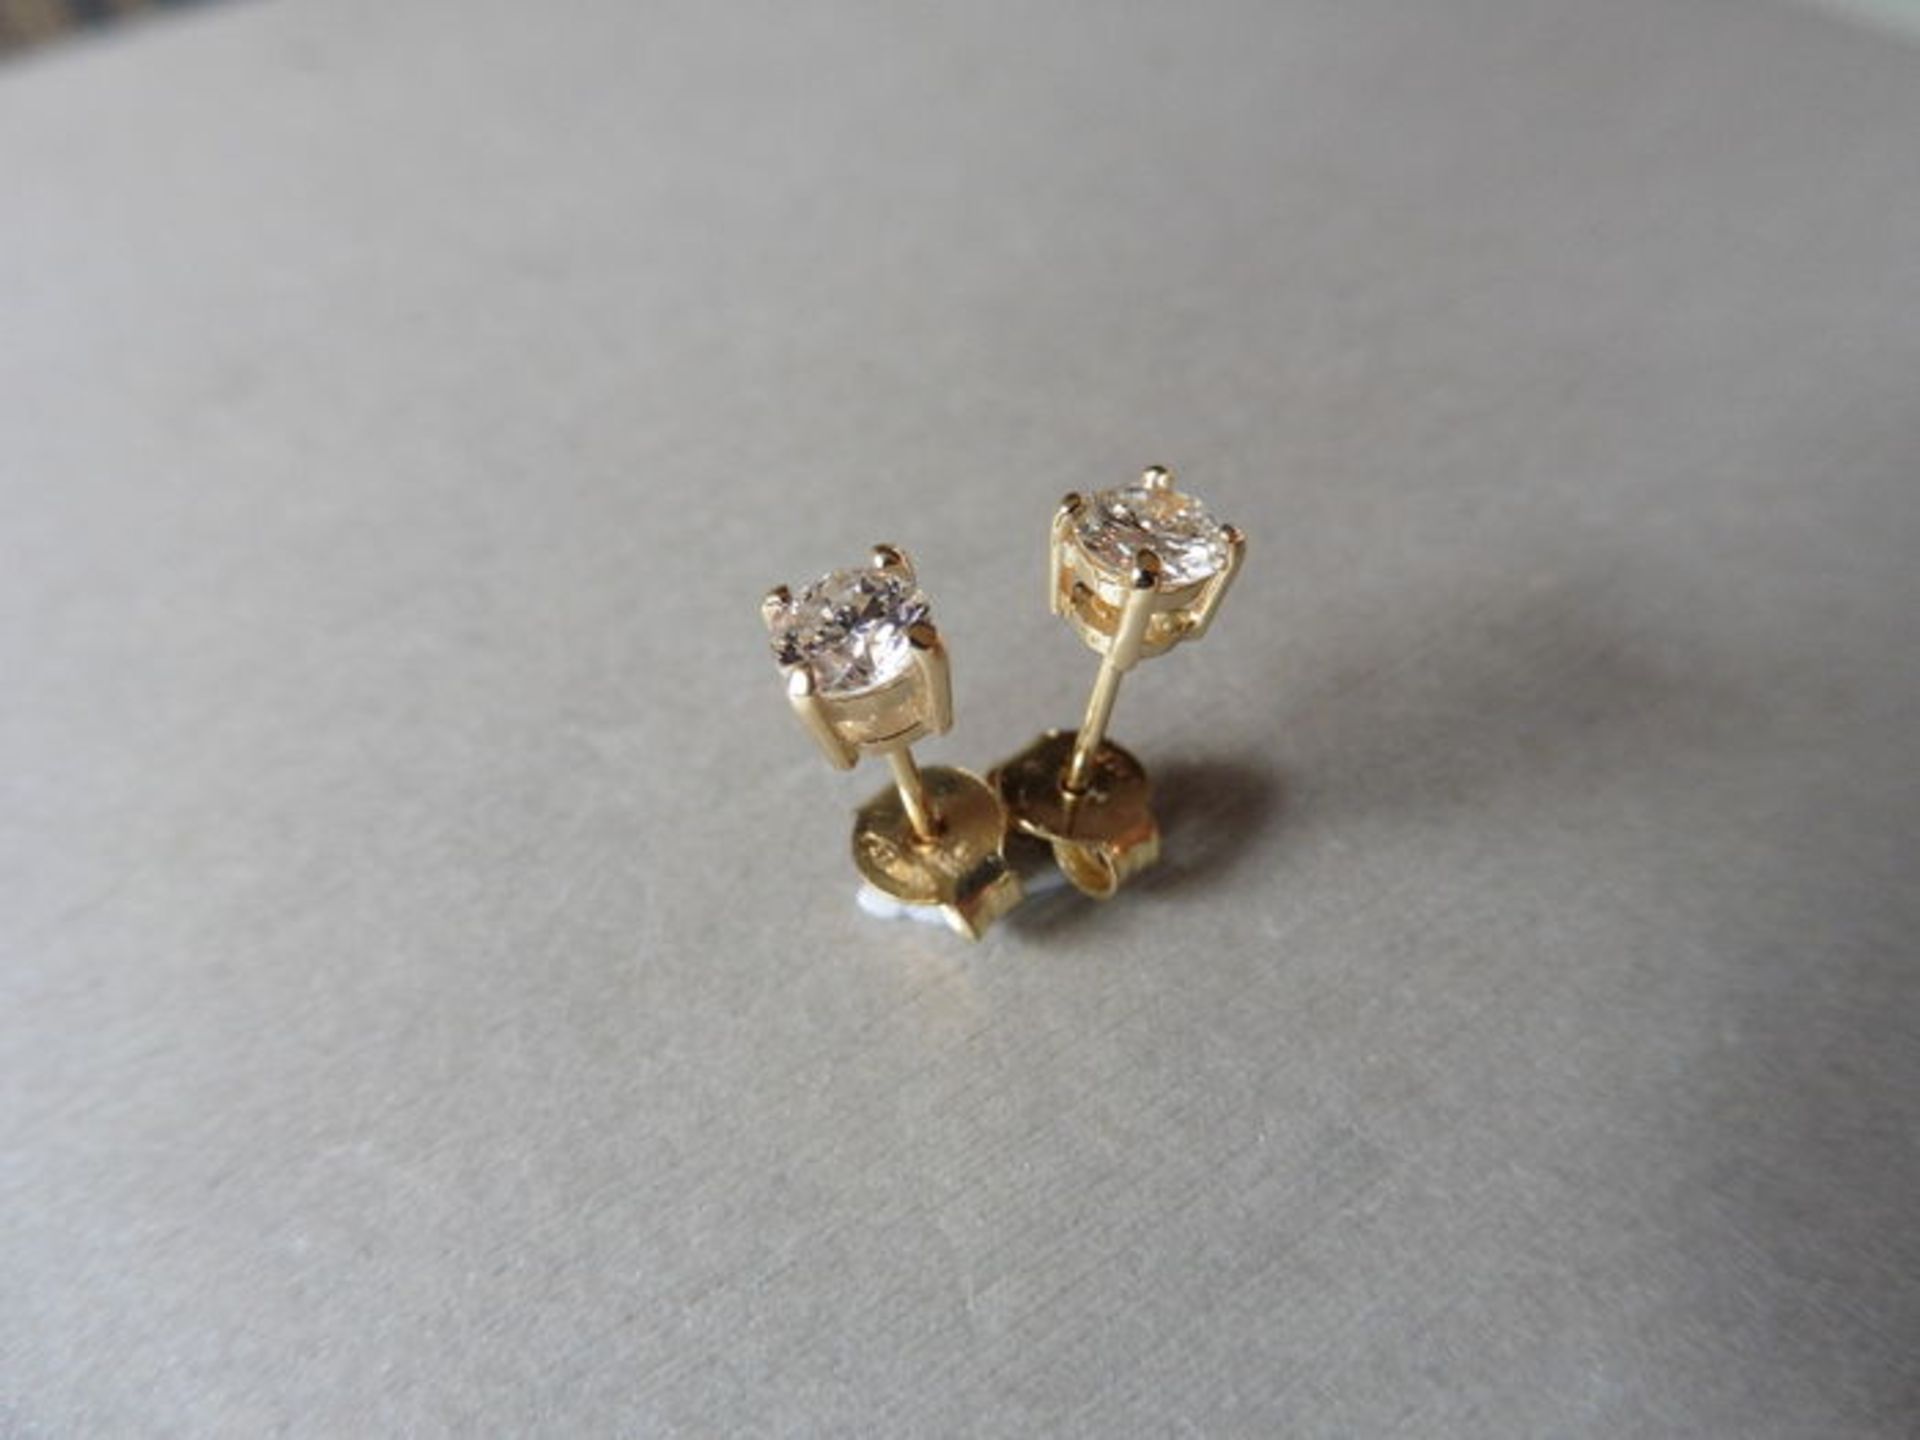 0.60ct Solitaire diamond stud earrings set with brilliant cut diamonds, SI2 clarity and I colour.